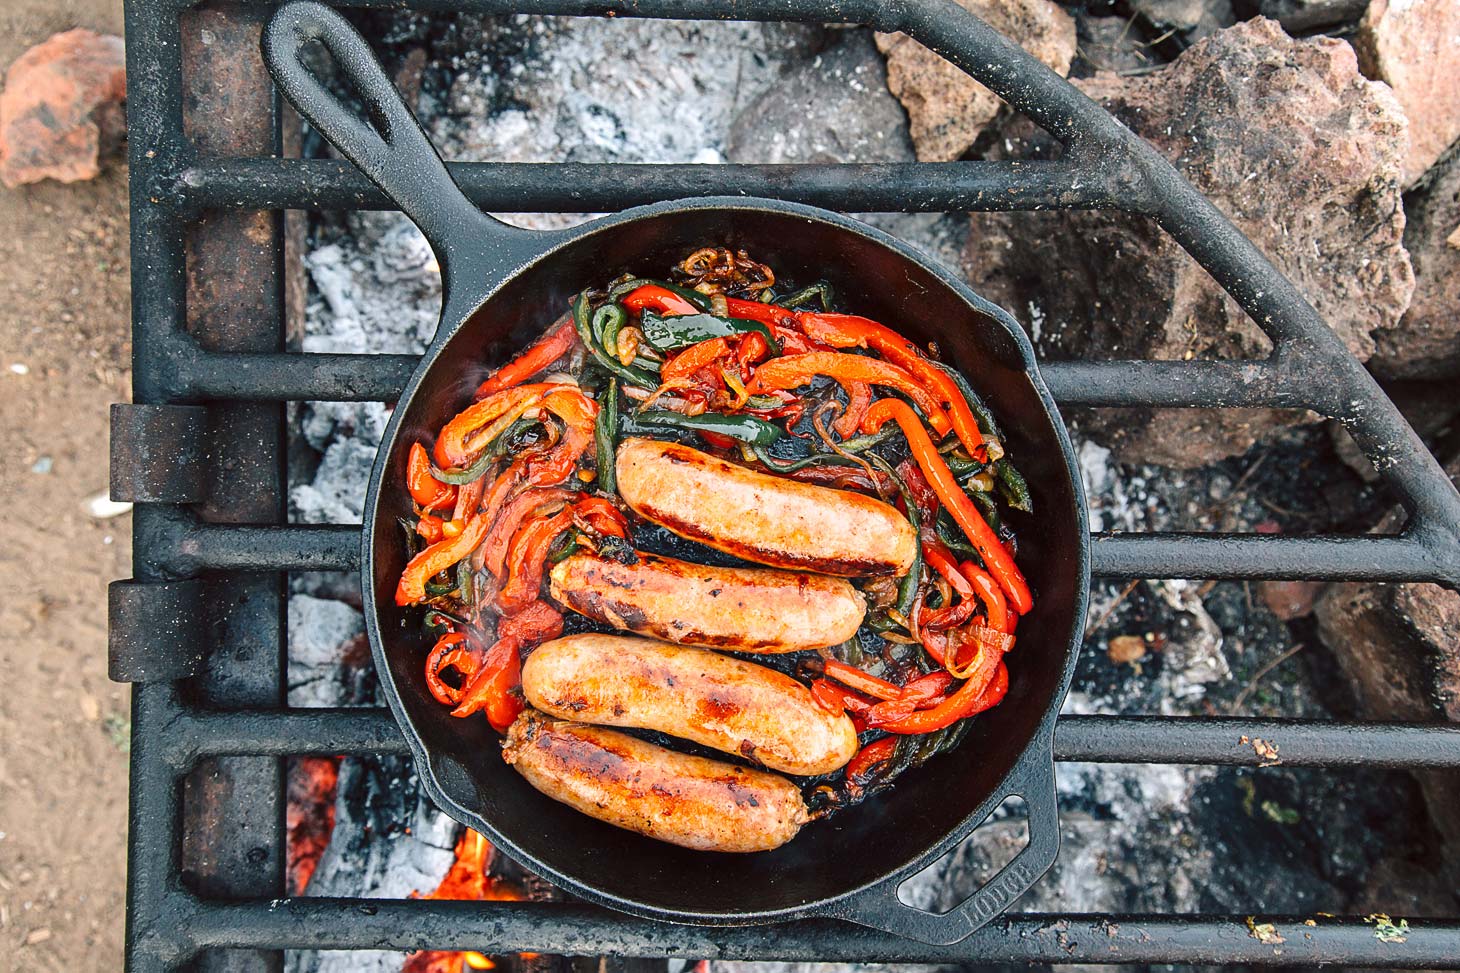 Cast Iron Brats are an easy campfire meal. Topped with sweet & spicy peppers and onions, this is a great, cheap dinner while camping.